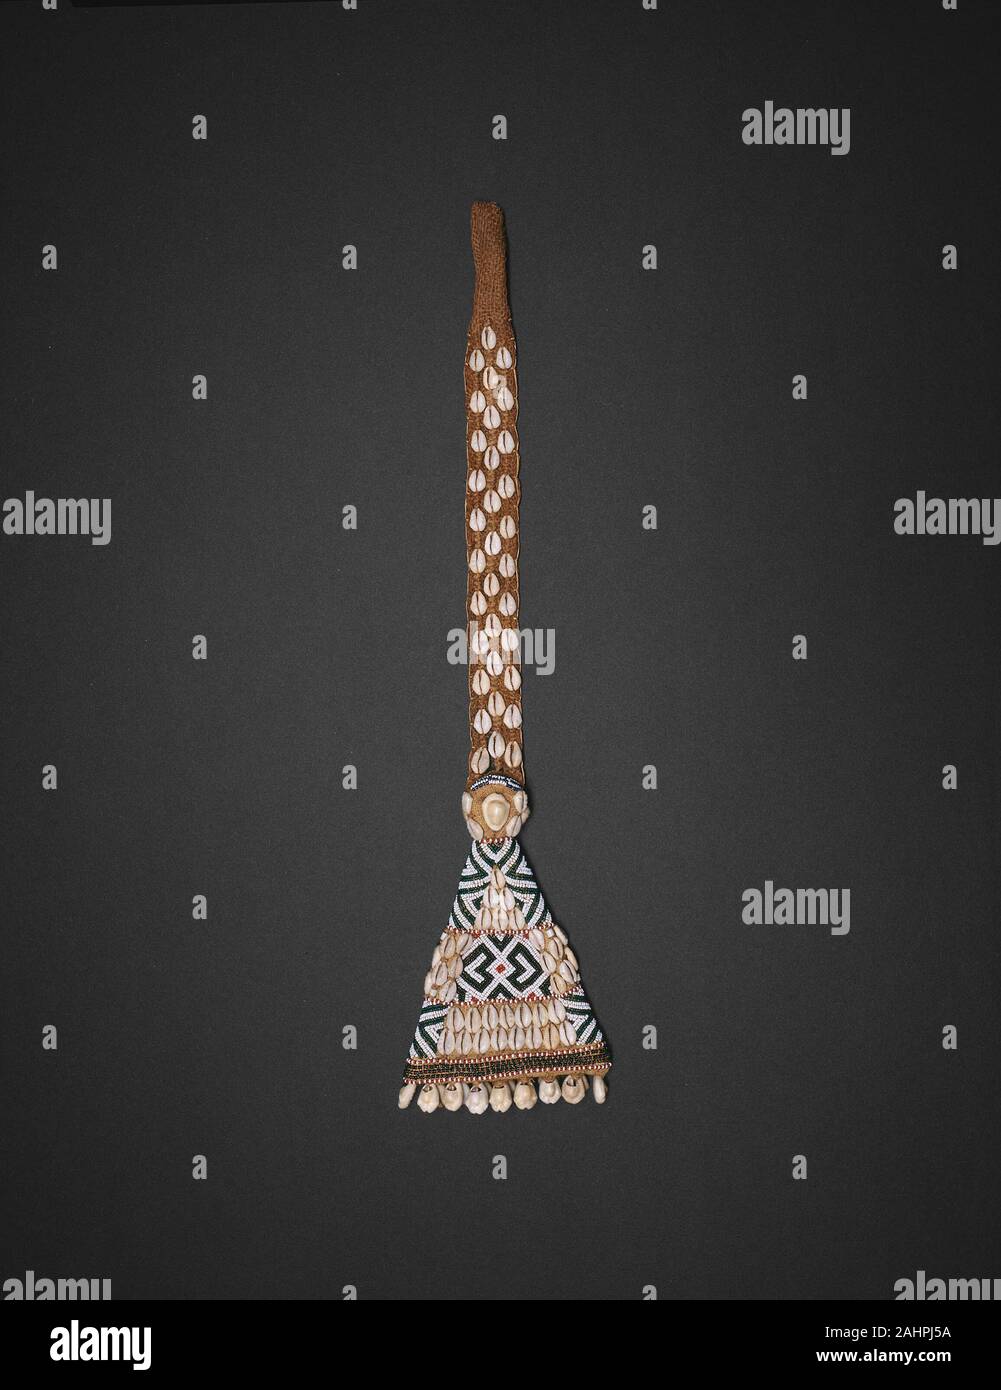 Kuba. Pendant. 1801–1900. Democratic Republic of the Congo. Jute, raffia, cowrie shells, and beads Since the inception of the Kuba Kingdom in the 16th century, individuals have signaled court rank and status with their elaborate dress. Glass beads imported from Europe and cowrie shells from the Indian Ocean have been used in the production of such accoutrements since the 18th century. Exclusively owned by men, bead- and shell-covered belts and pendants like this pre-1910 examples are still worn in combination with voluminous textile skirt-wrappers by both Kuba royalty and Kuba masqueraders. [S Stock Photo